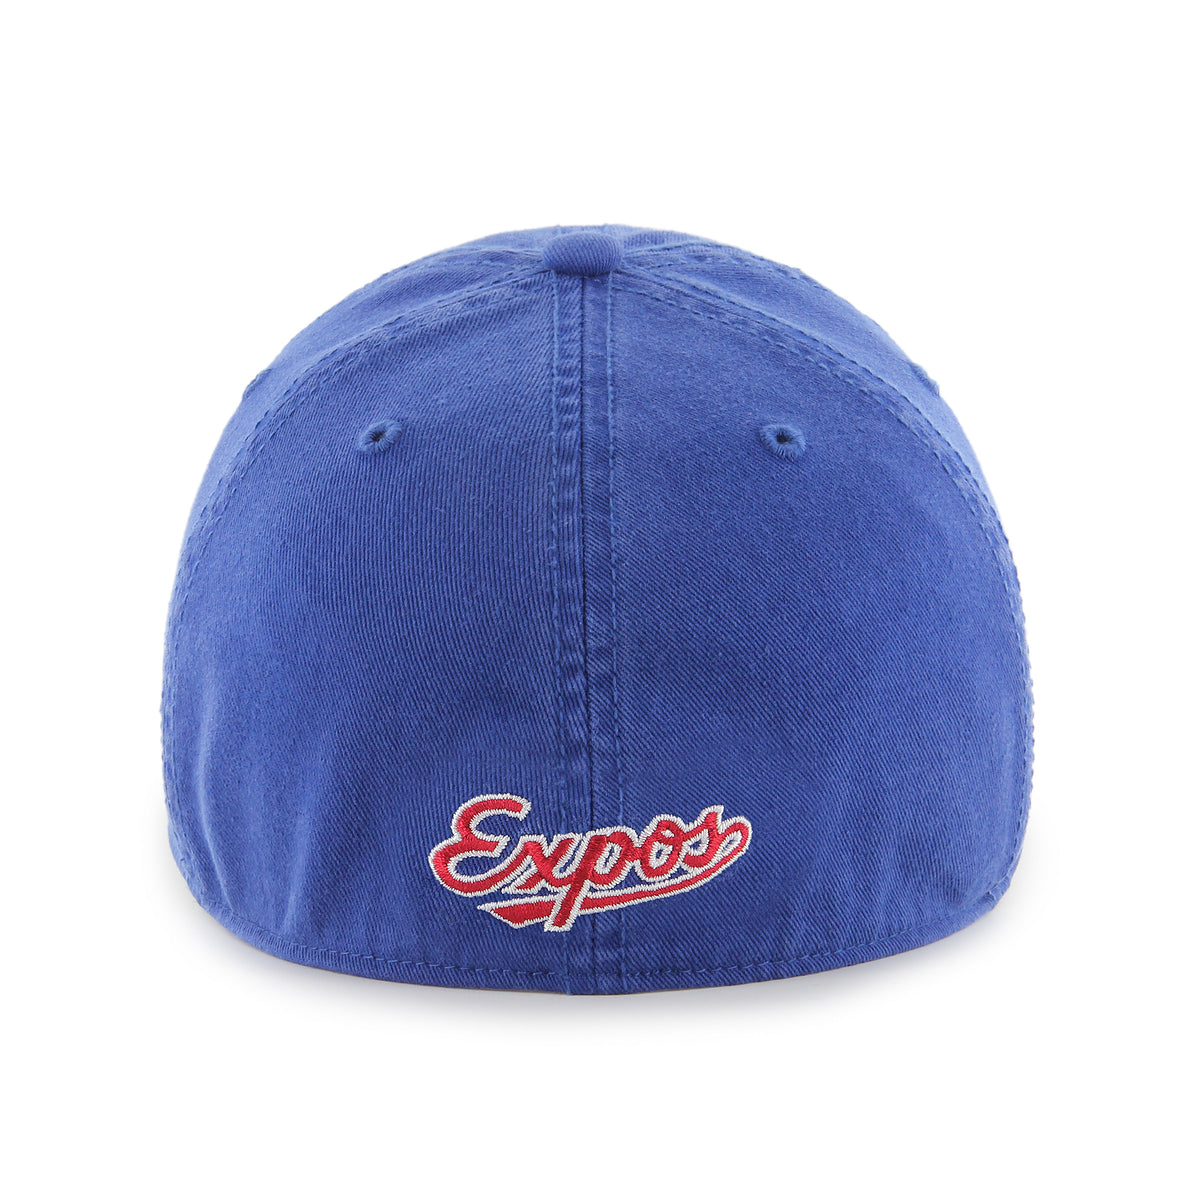 MONTREAL EXPOS COOPERSTOWN CLASSIC '47 FRANCHISE